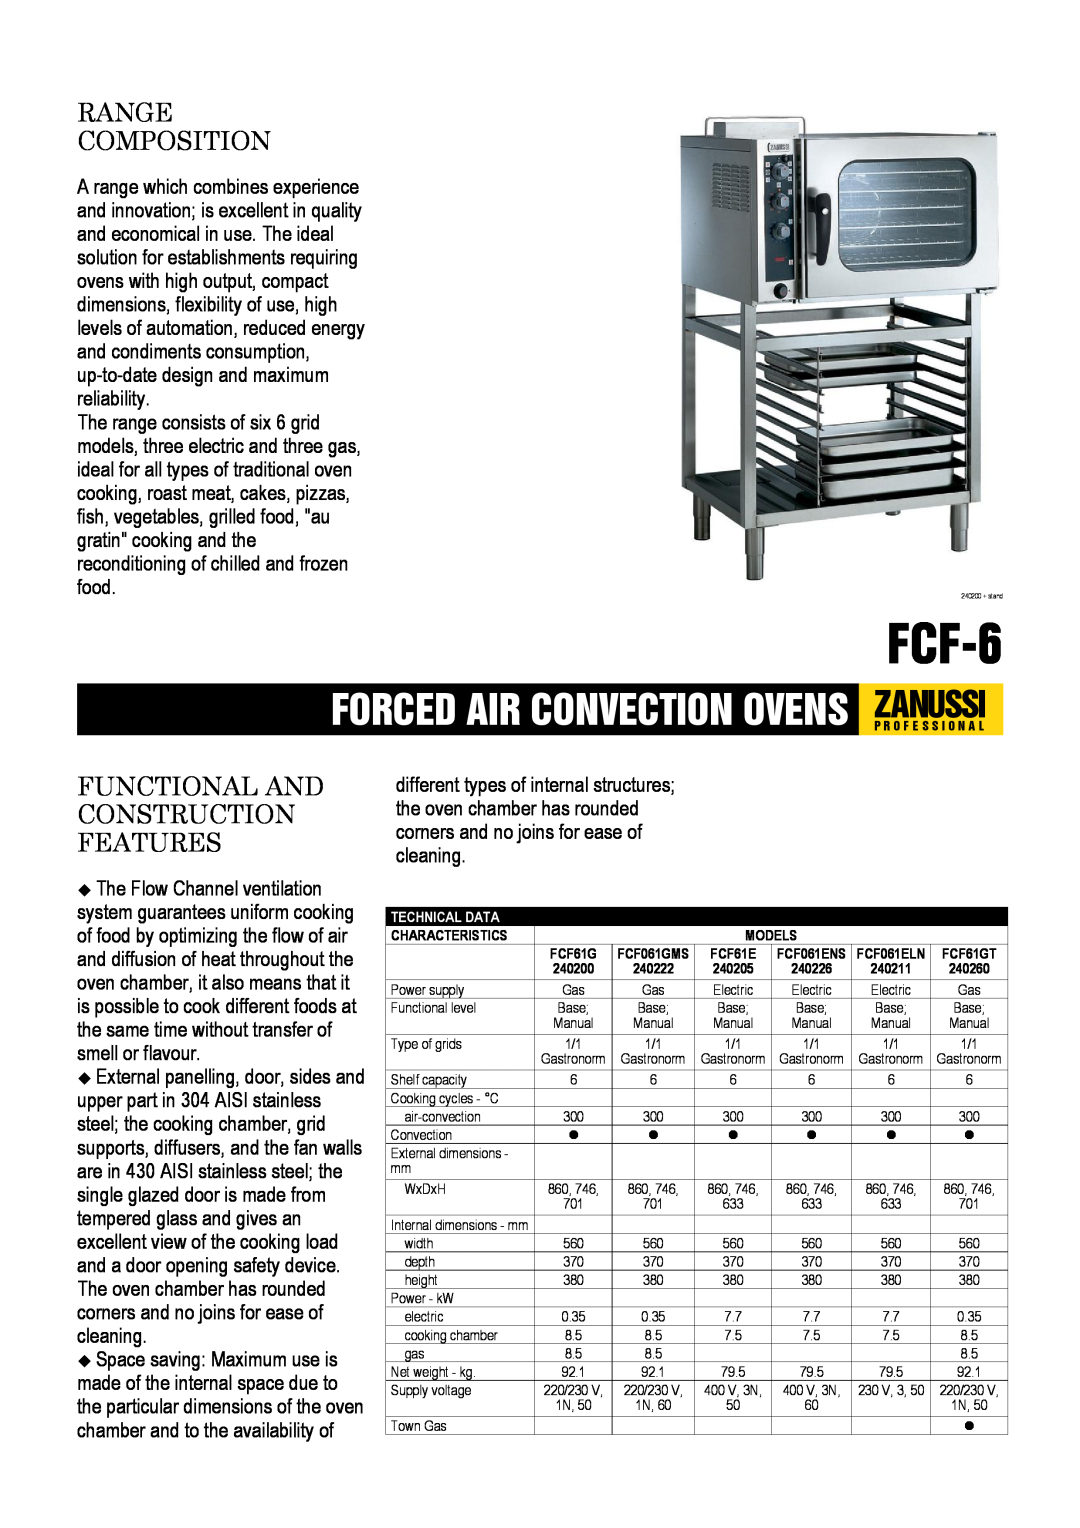 Zanussi FCF-6, 240260, FCF061ENS, 240226, 240222, 240211 dimensions Range Composition, Functional And Construction Features 